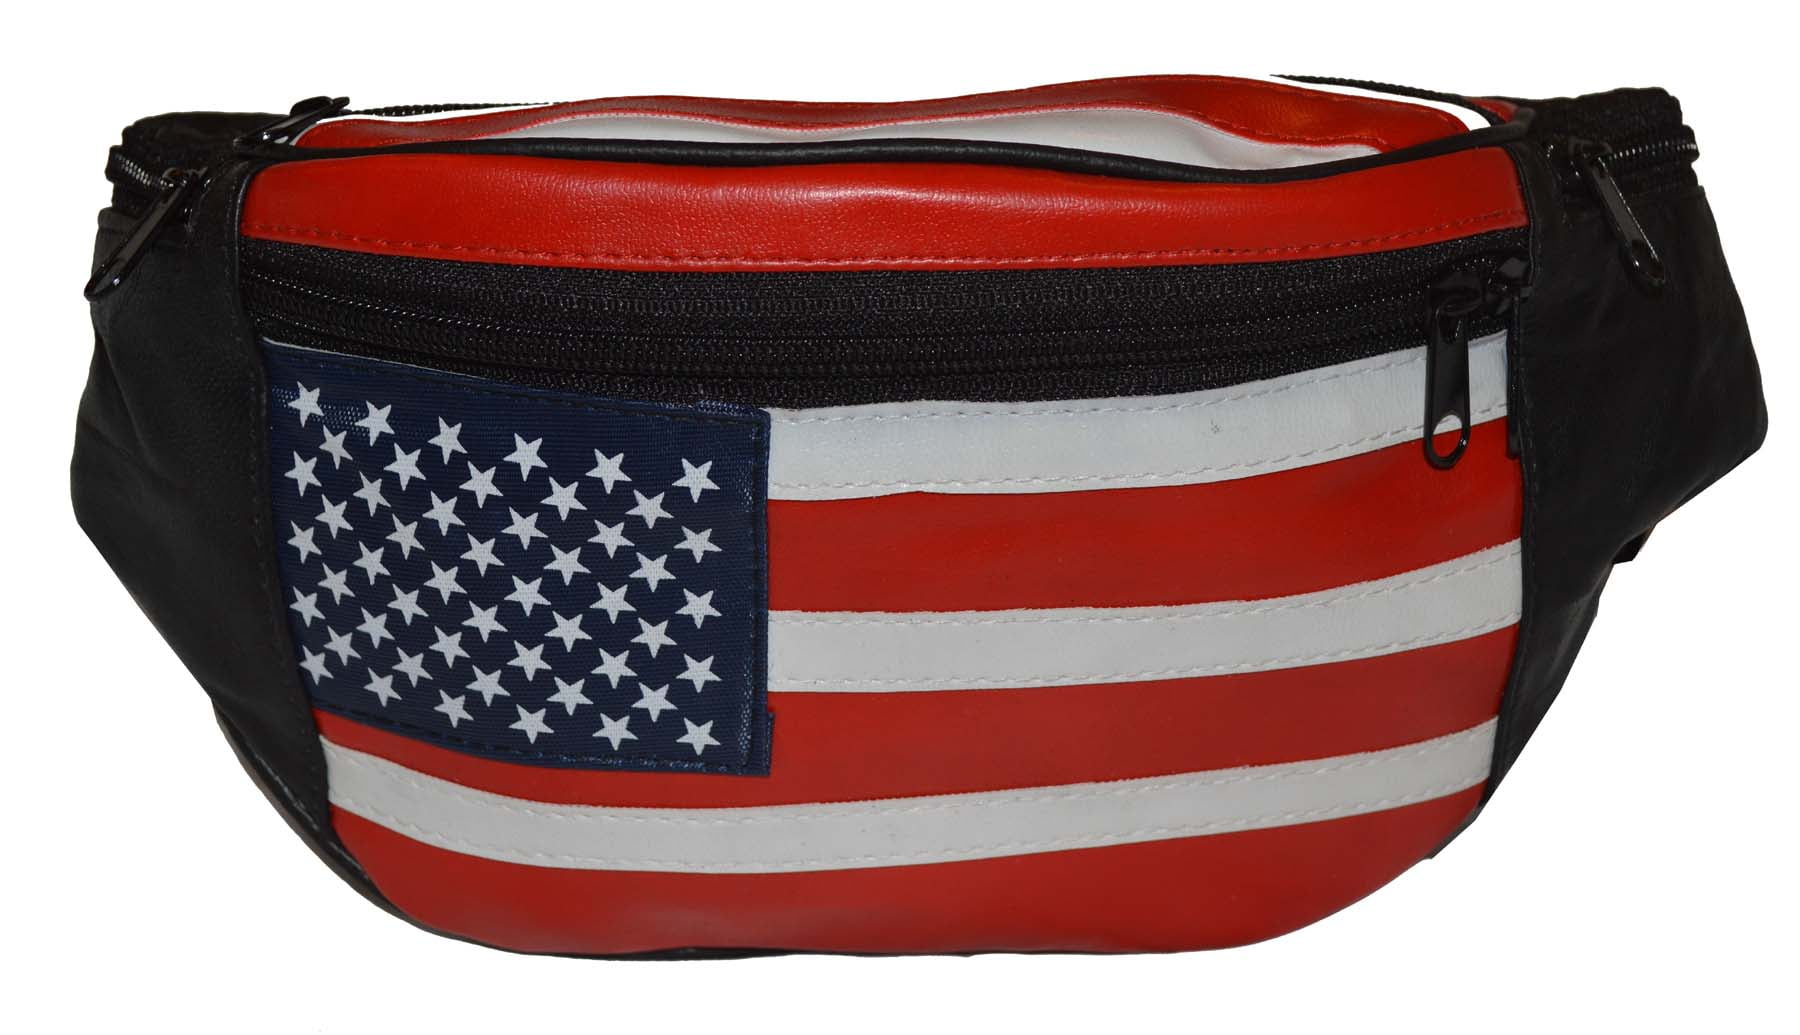 Details about   USA American Flag July 4th Fanny Pack Money Bag Waist Purse Sunglasses Red Blue 